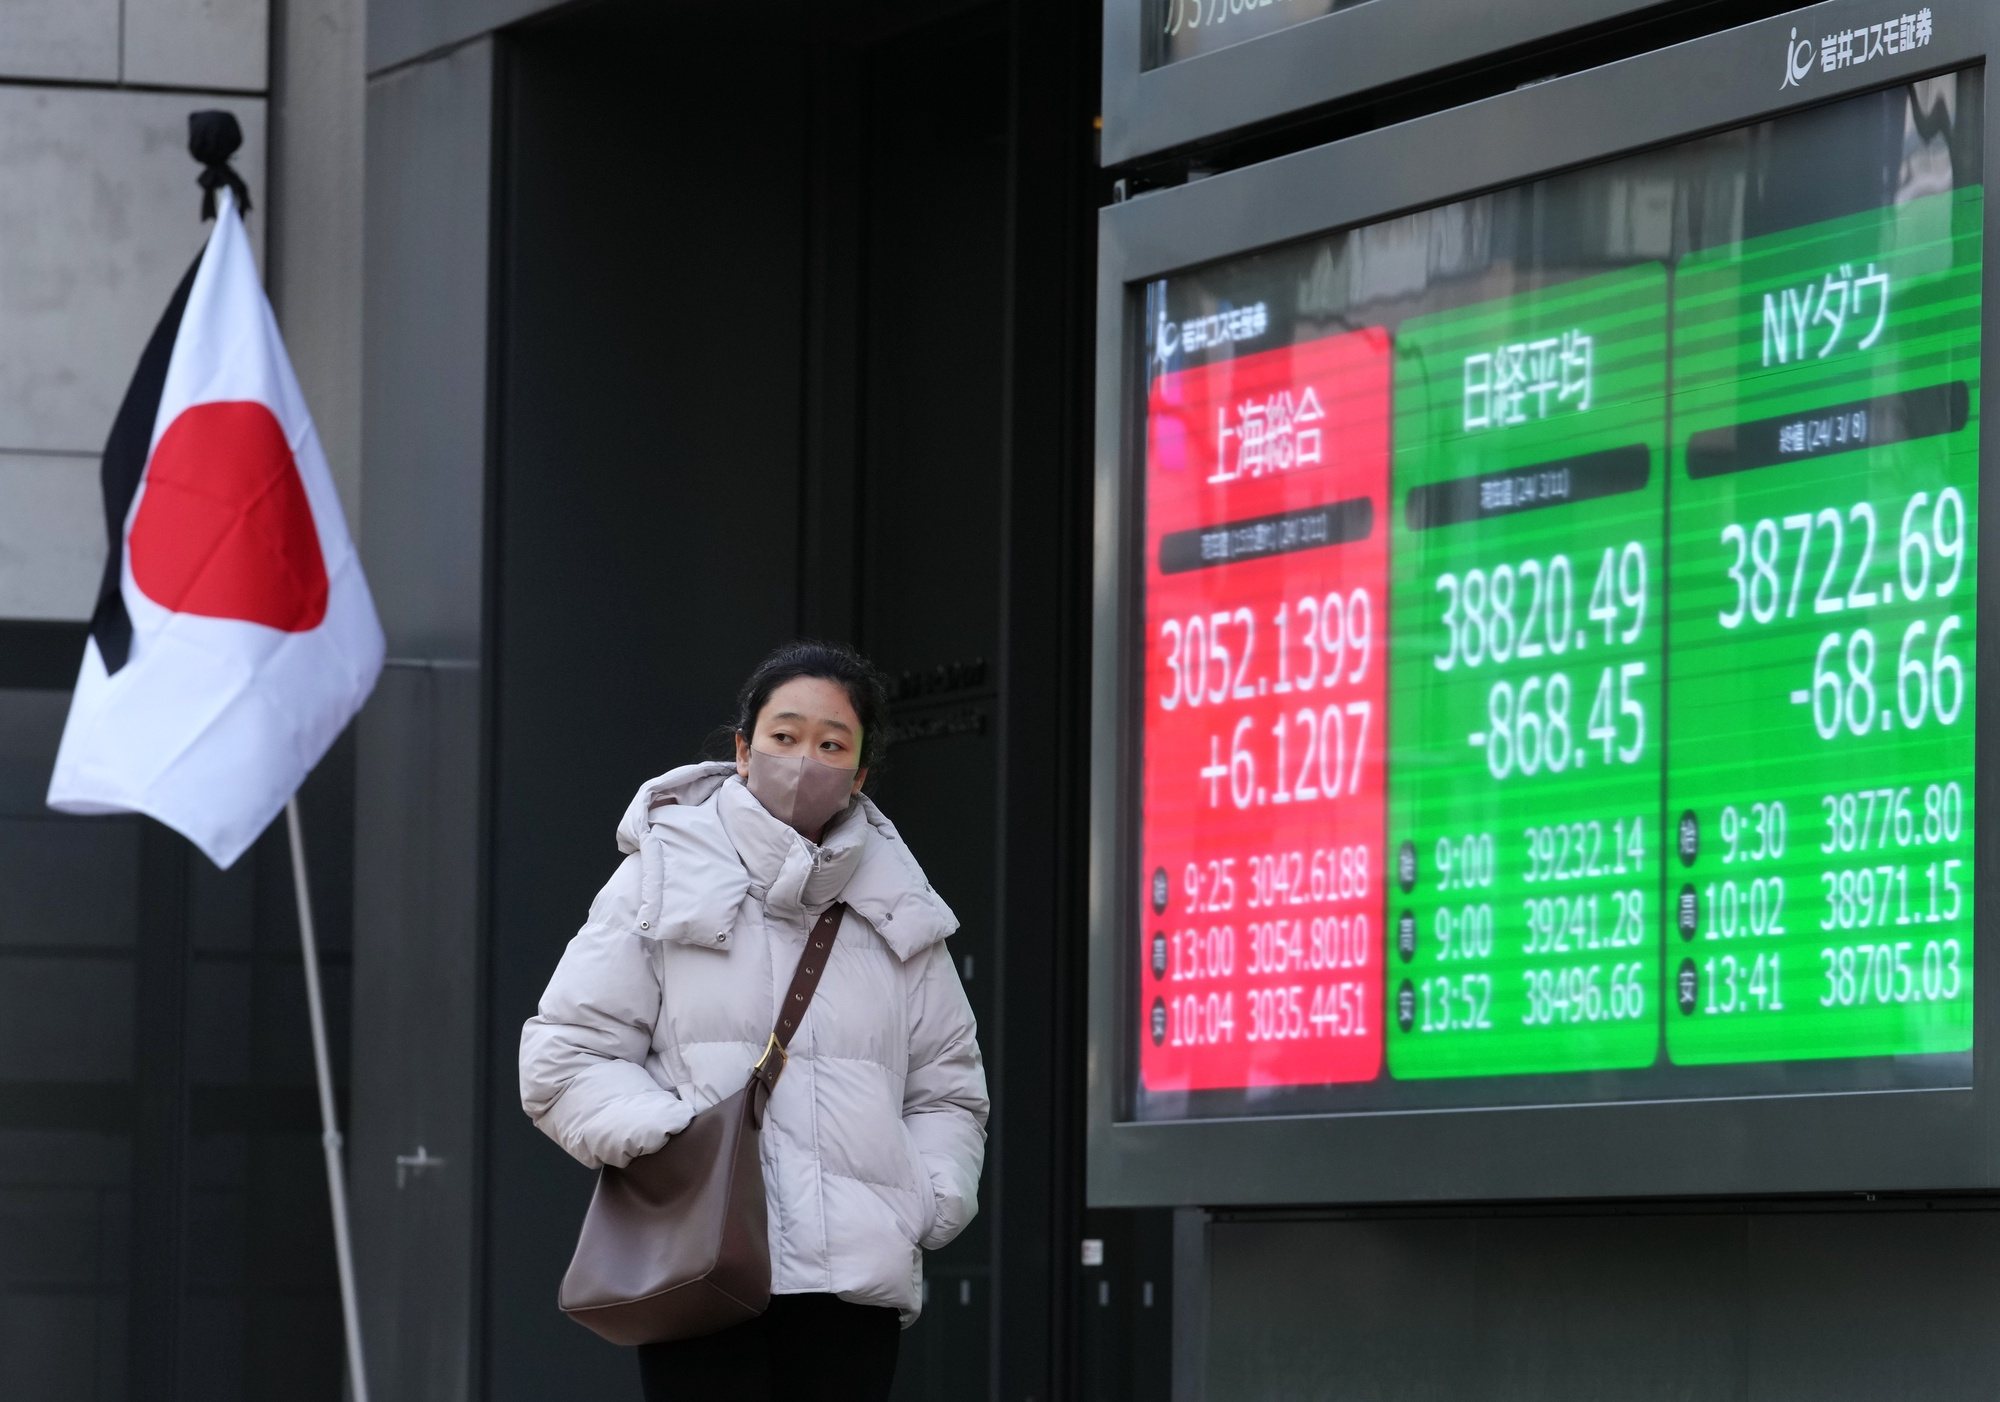 epa11213711 A pedestrian walks past a display showing the closing information of the Nikkei Stock Average in Tokyo, Japan, 11 March 2024. Tokyo&#039;s stock benchmark tumbled 868.45 points, or 2.19 percent, to close at 38,820.49 after climbing over 40,000 points previous week.  EPA/KIMIMASA MAYAMA